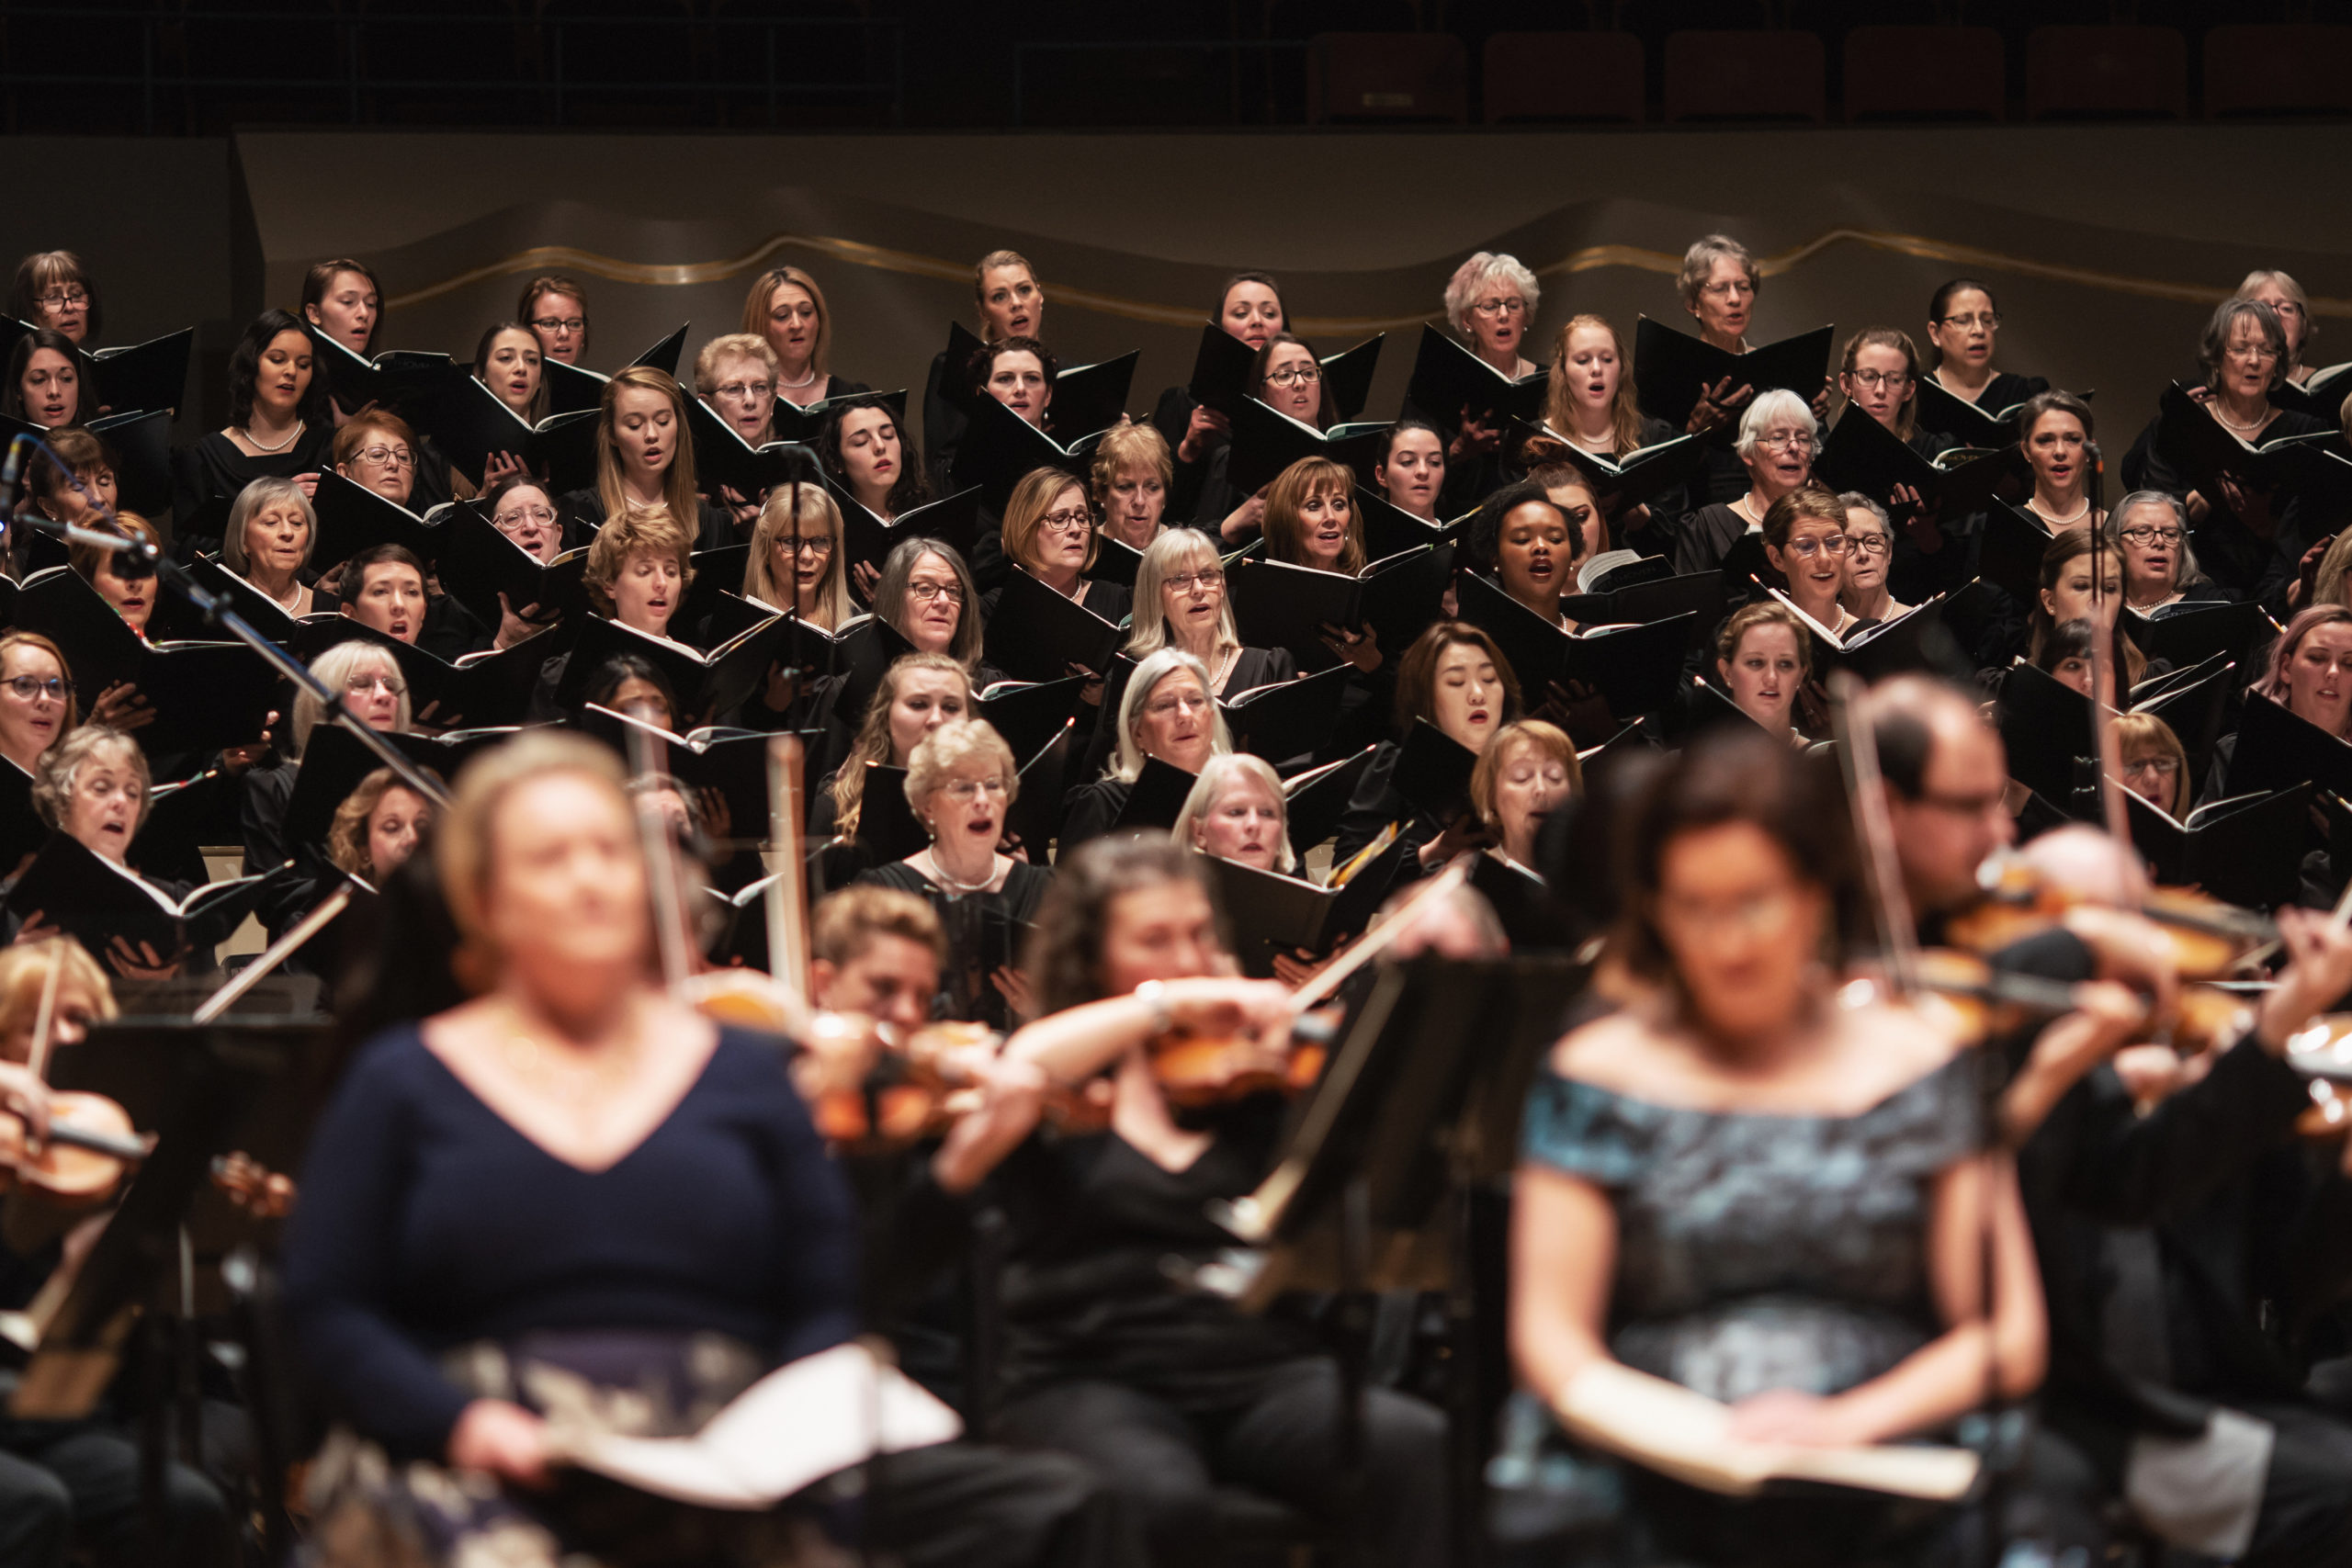 Alex Bowen (third row of vocalists, third from left) sings with the Colorado Symphony in February 2020. Photo credit: Amanda Tipton Photography.